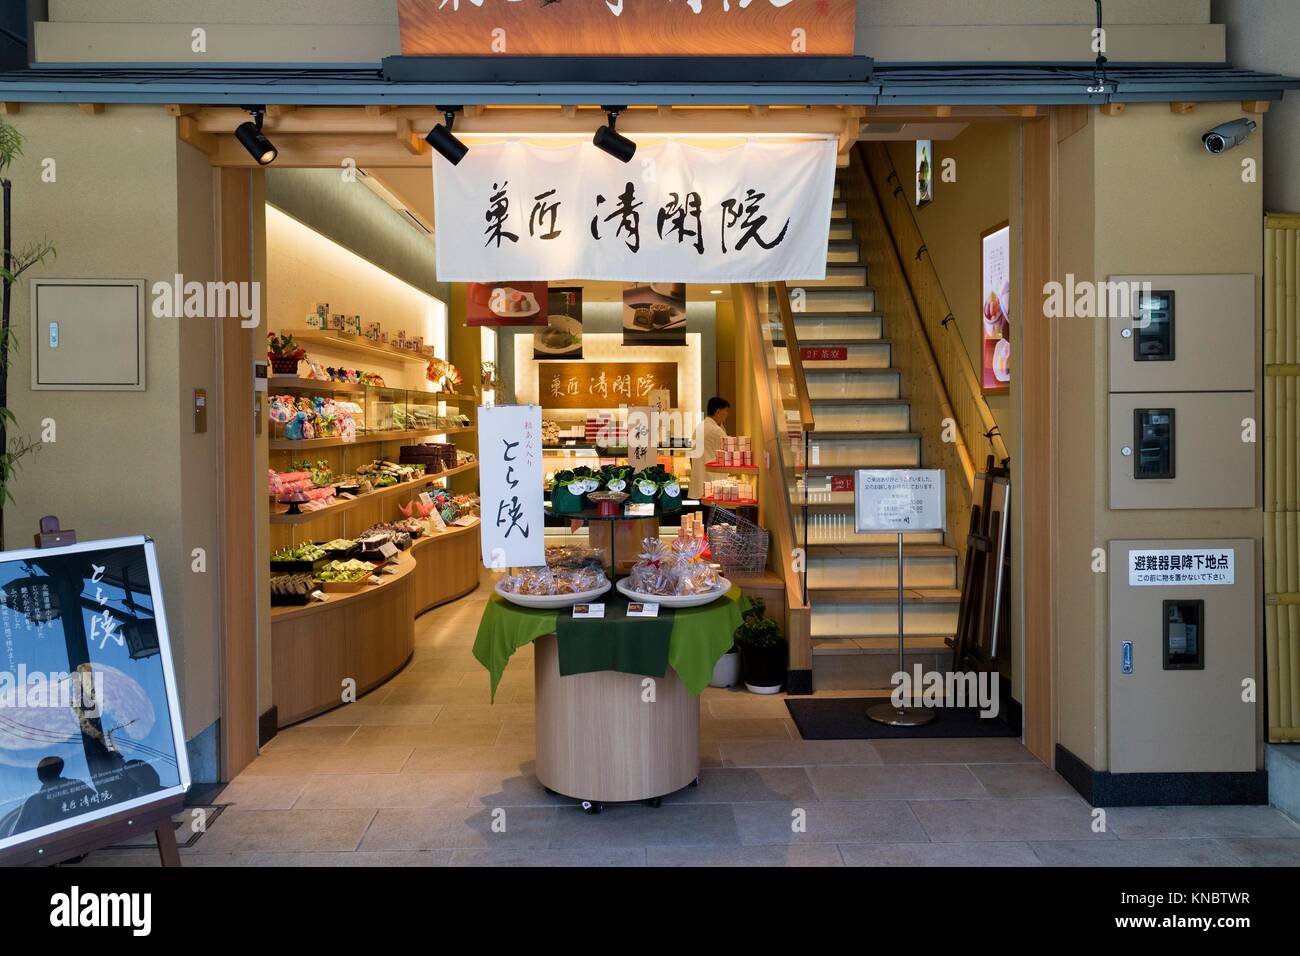 Kyoto, Japan - Traditional Omiyage Shop for Japanese gifts and delicacy. Stock Photo